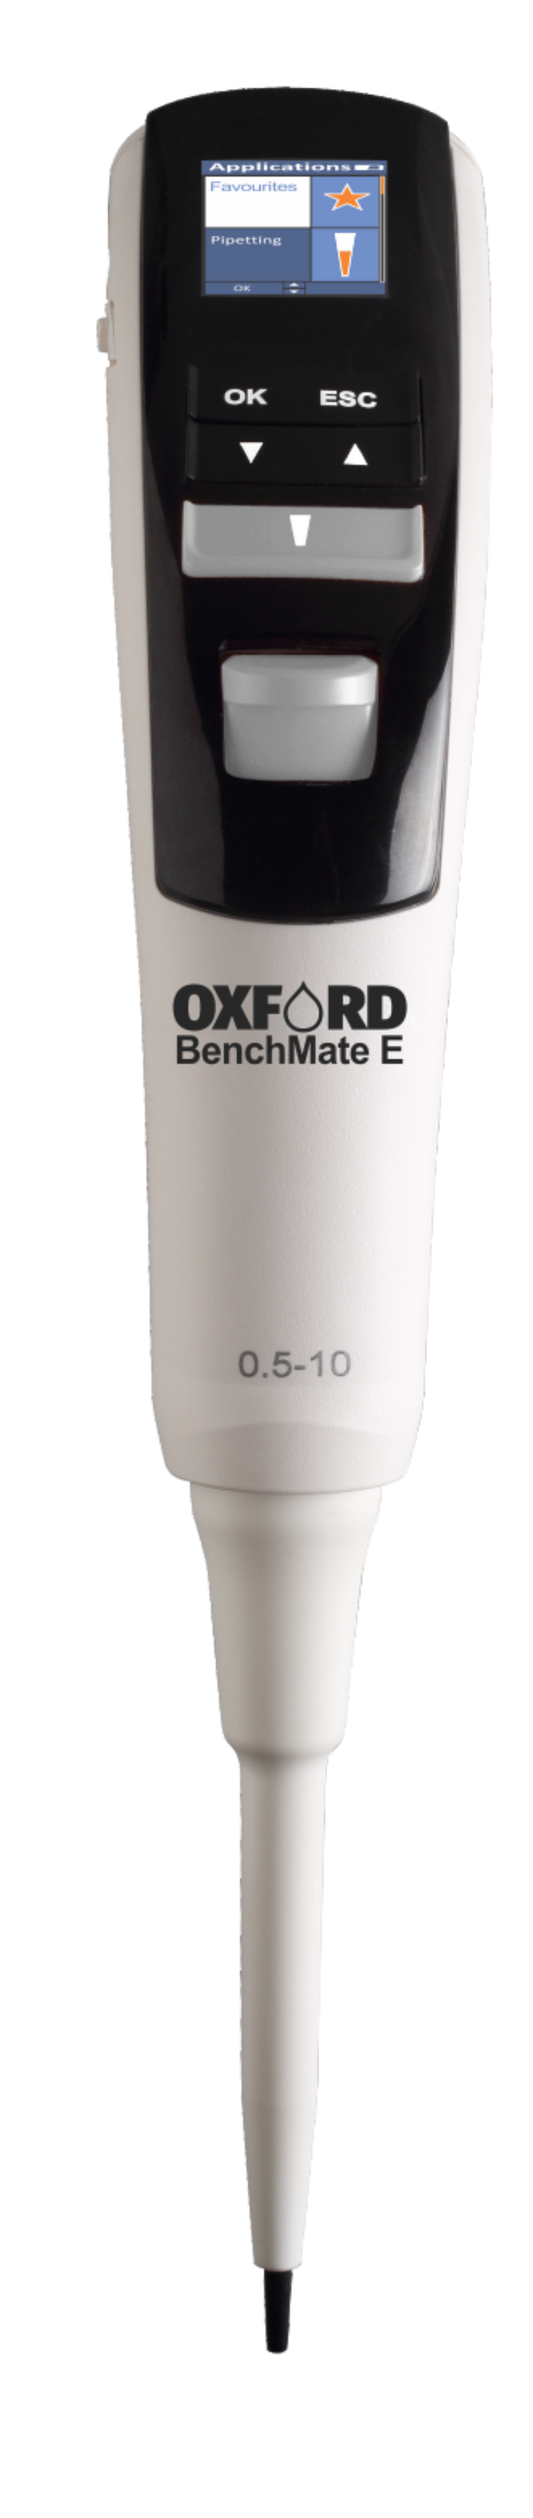 Oxford BenchMate Electronic Pipette 50-1000 µl